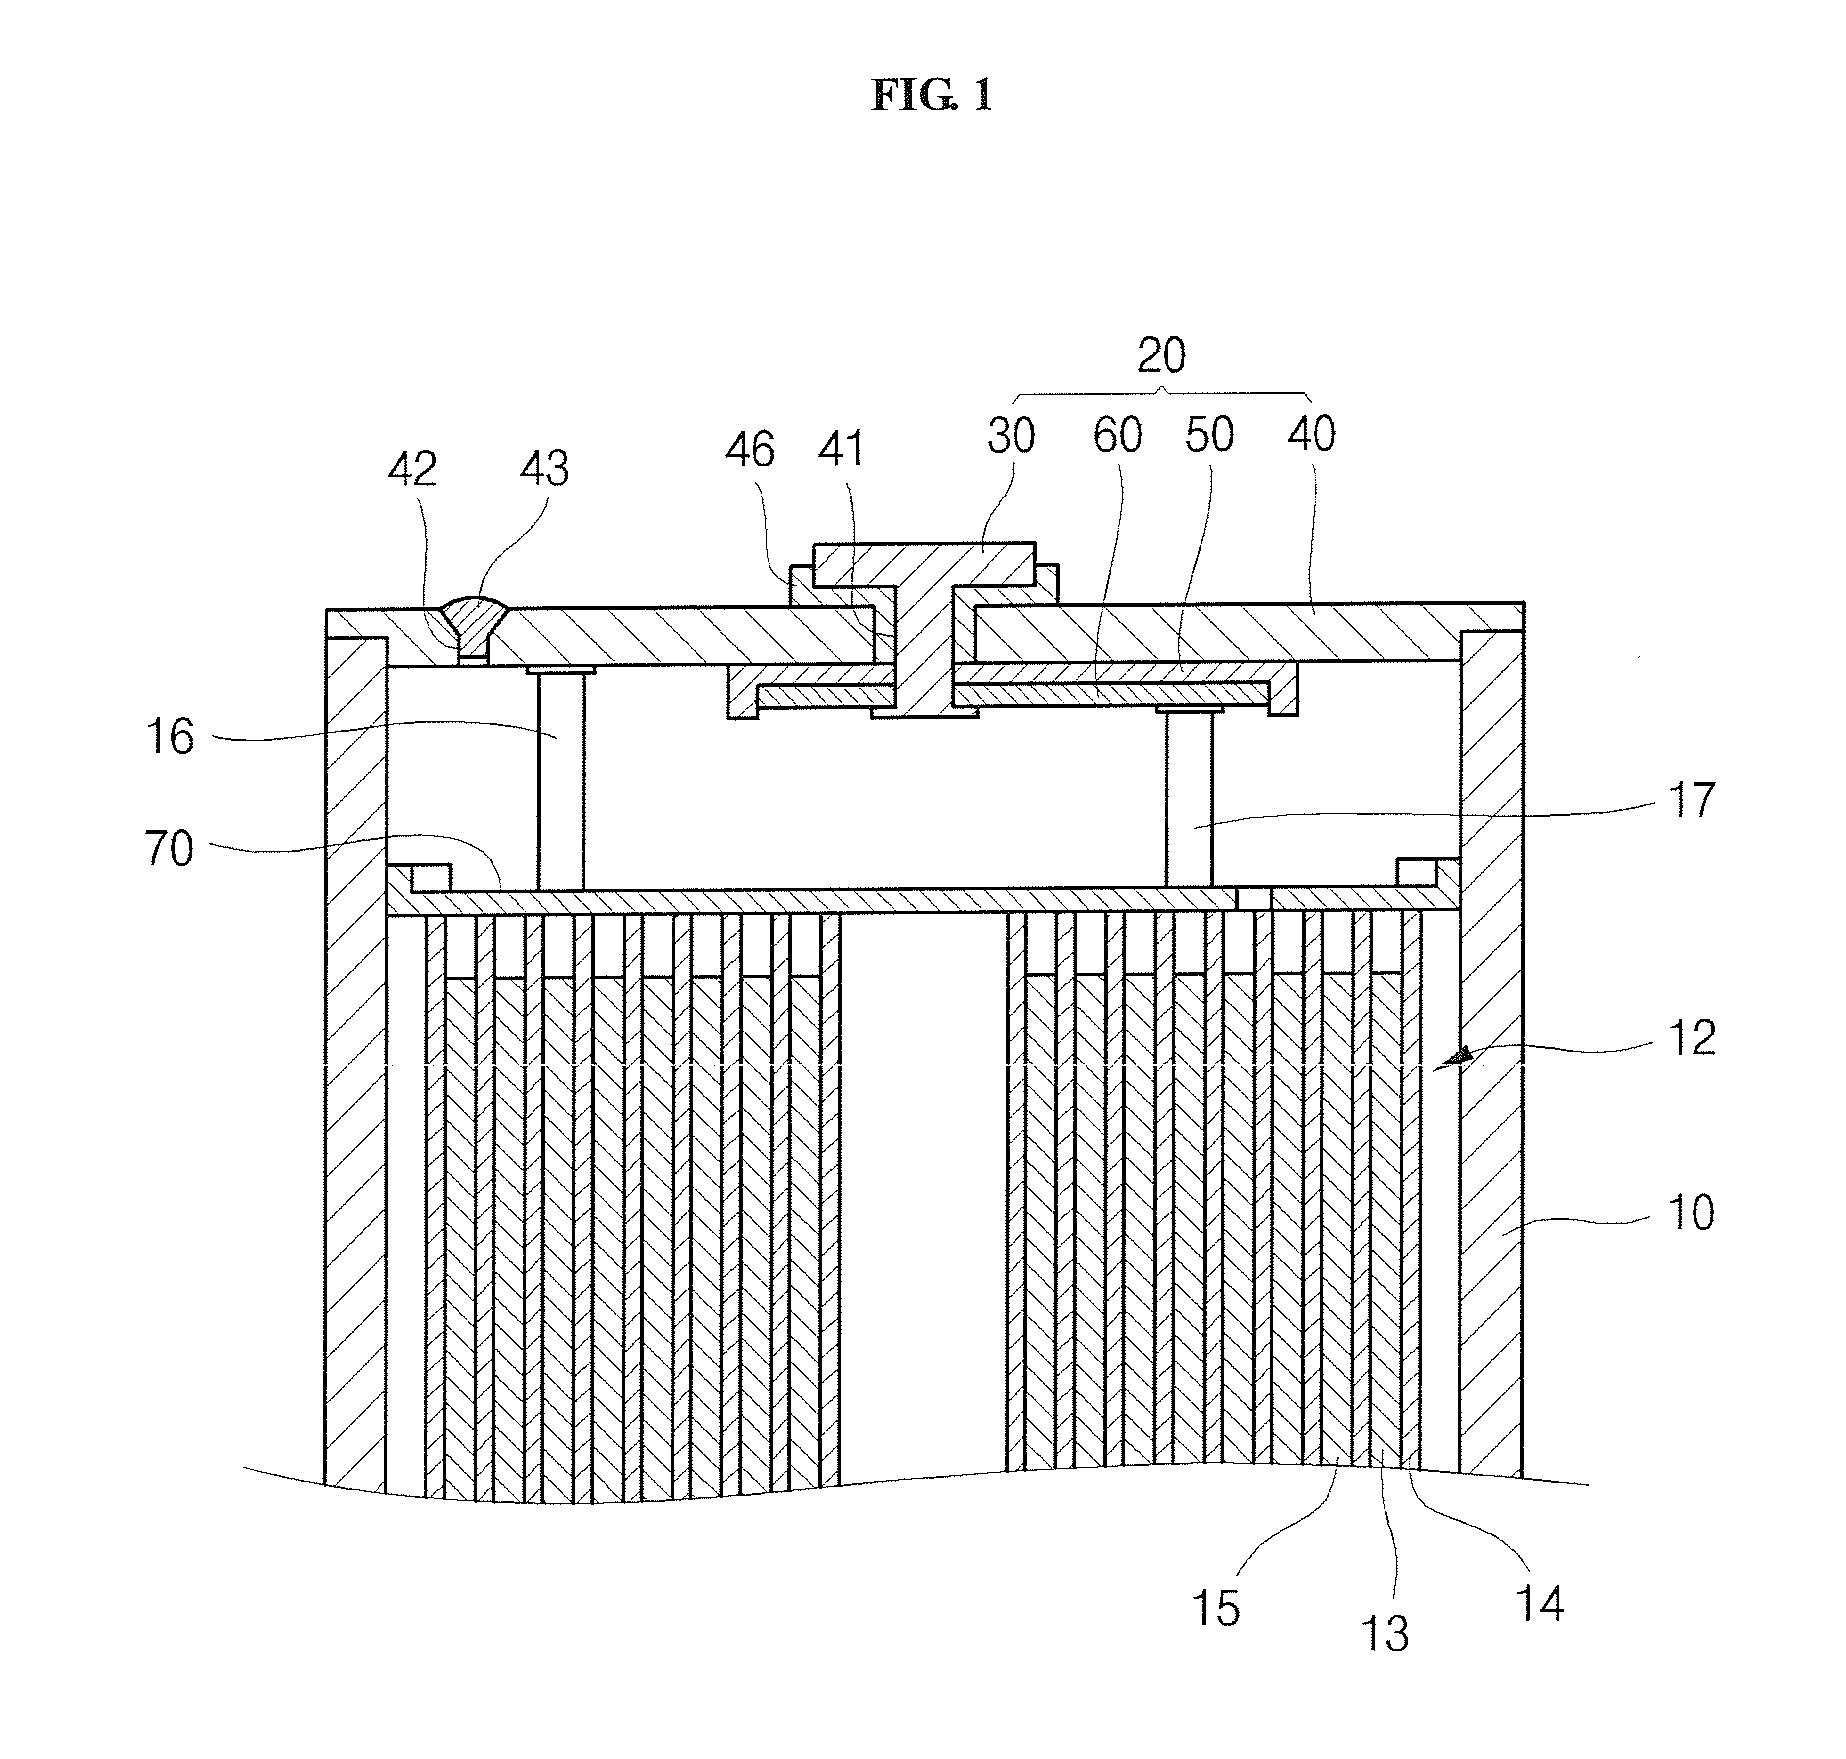 Electrolyte for high voltage lithium rechargeable battery and high voltage lithium rechargeable battery employing the same